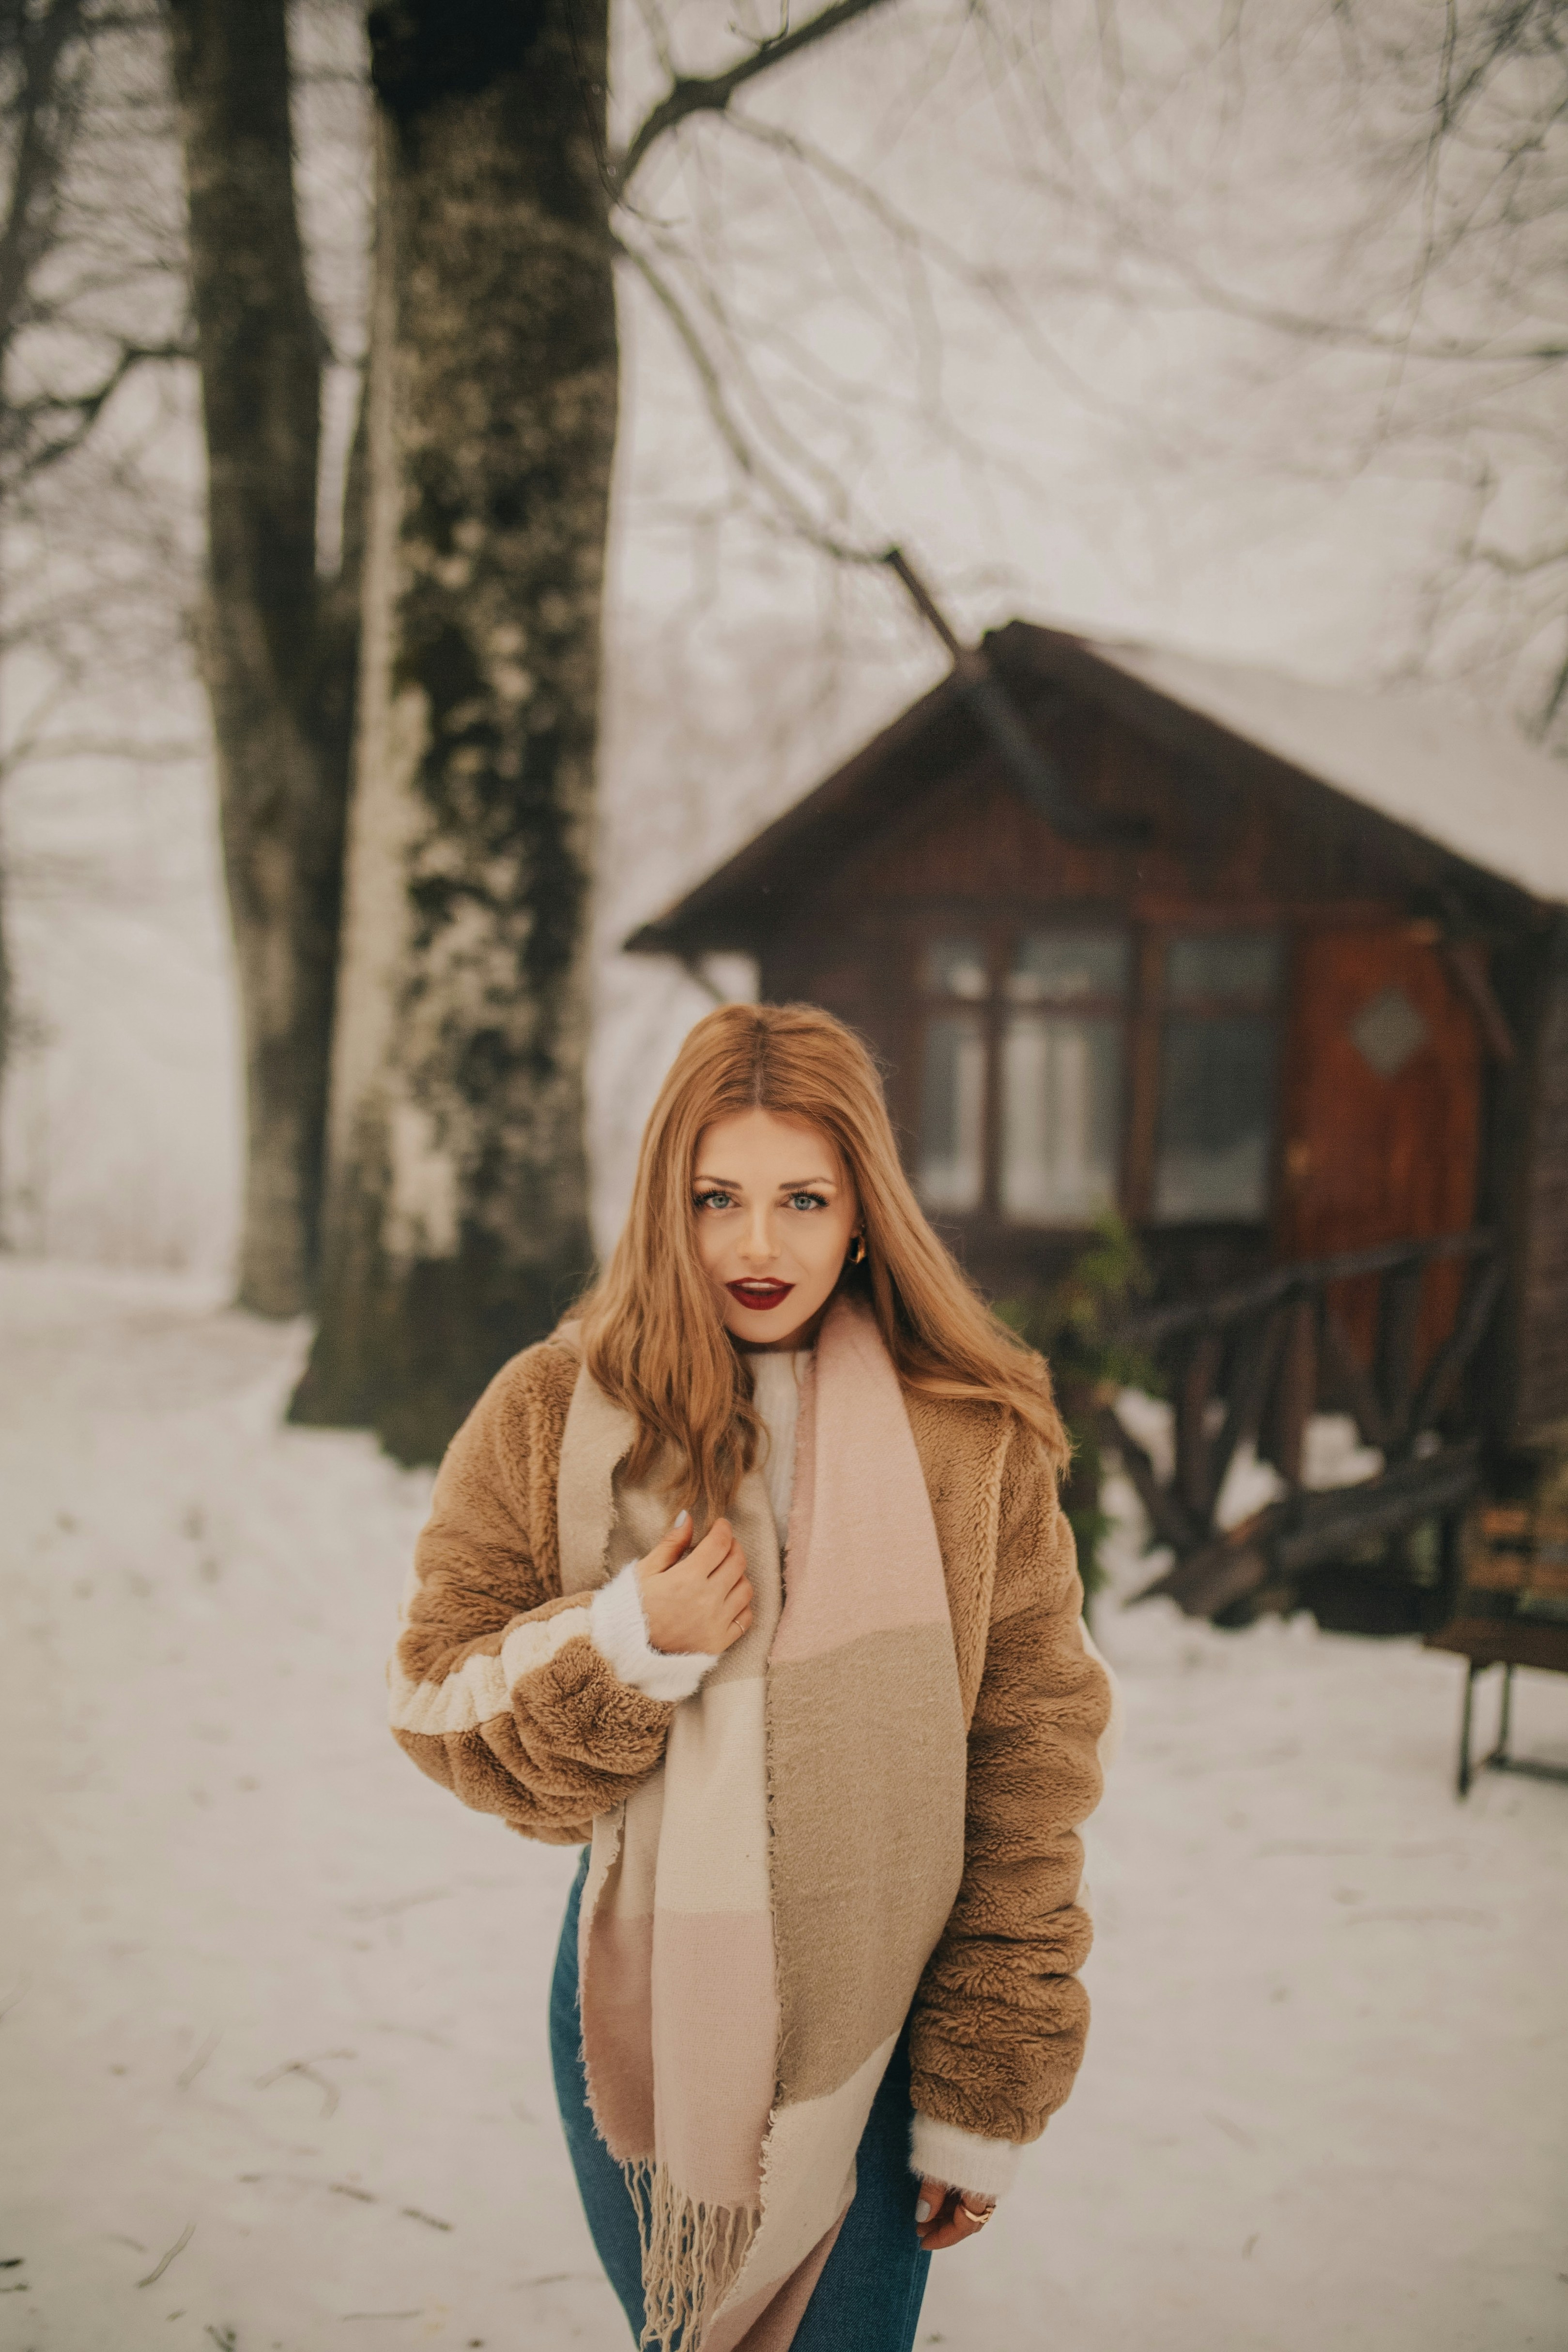 forest, tree, wood, woman, hat, jacket, winter, autumn, leaf, fashion, winter fashion, holiday, serenity, nature, landscape, shorts, face, smile, cool, forest, snow, fur, mantle, coat, boot, snowman, mountain